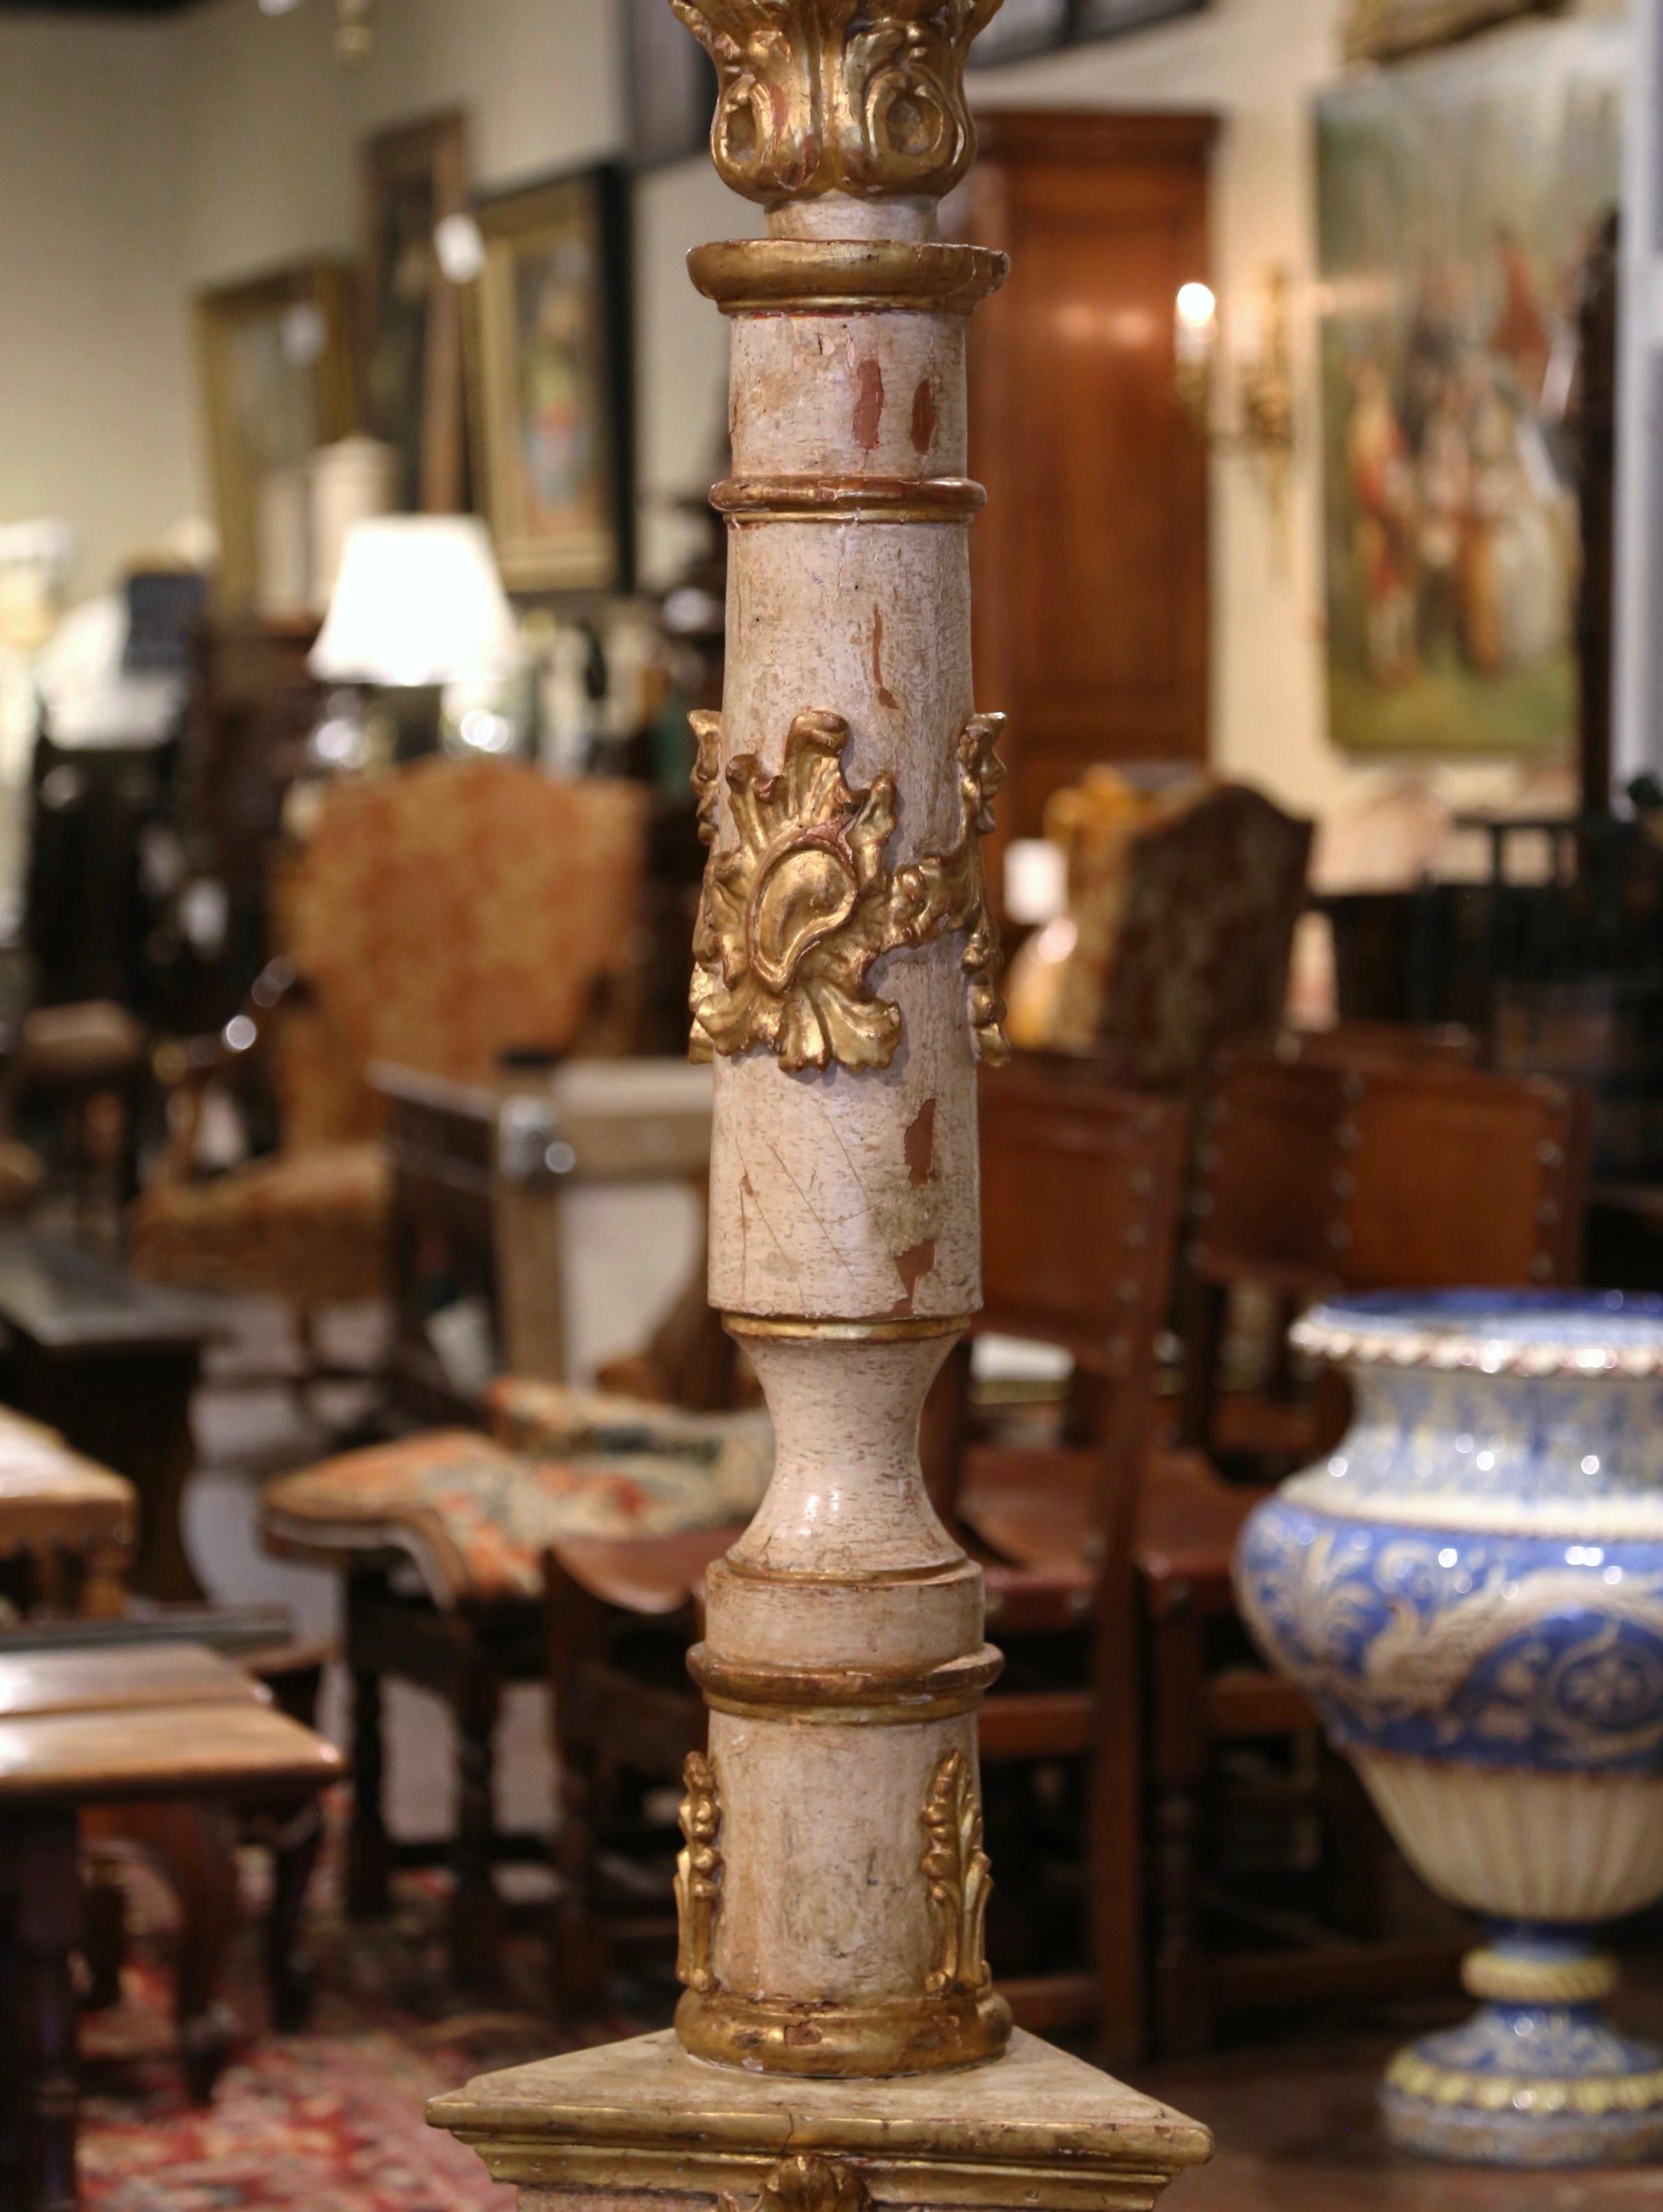 Hand-Painted Mid-19th Century Italian Carved Polychrome and Gilt Candle Holder Floor Lamp For Sale